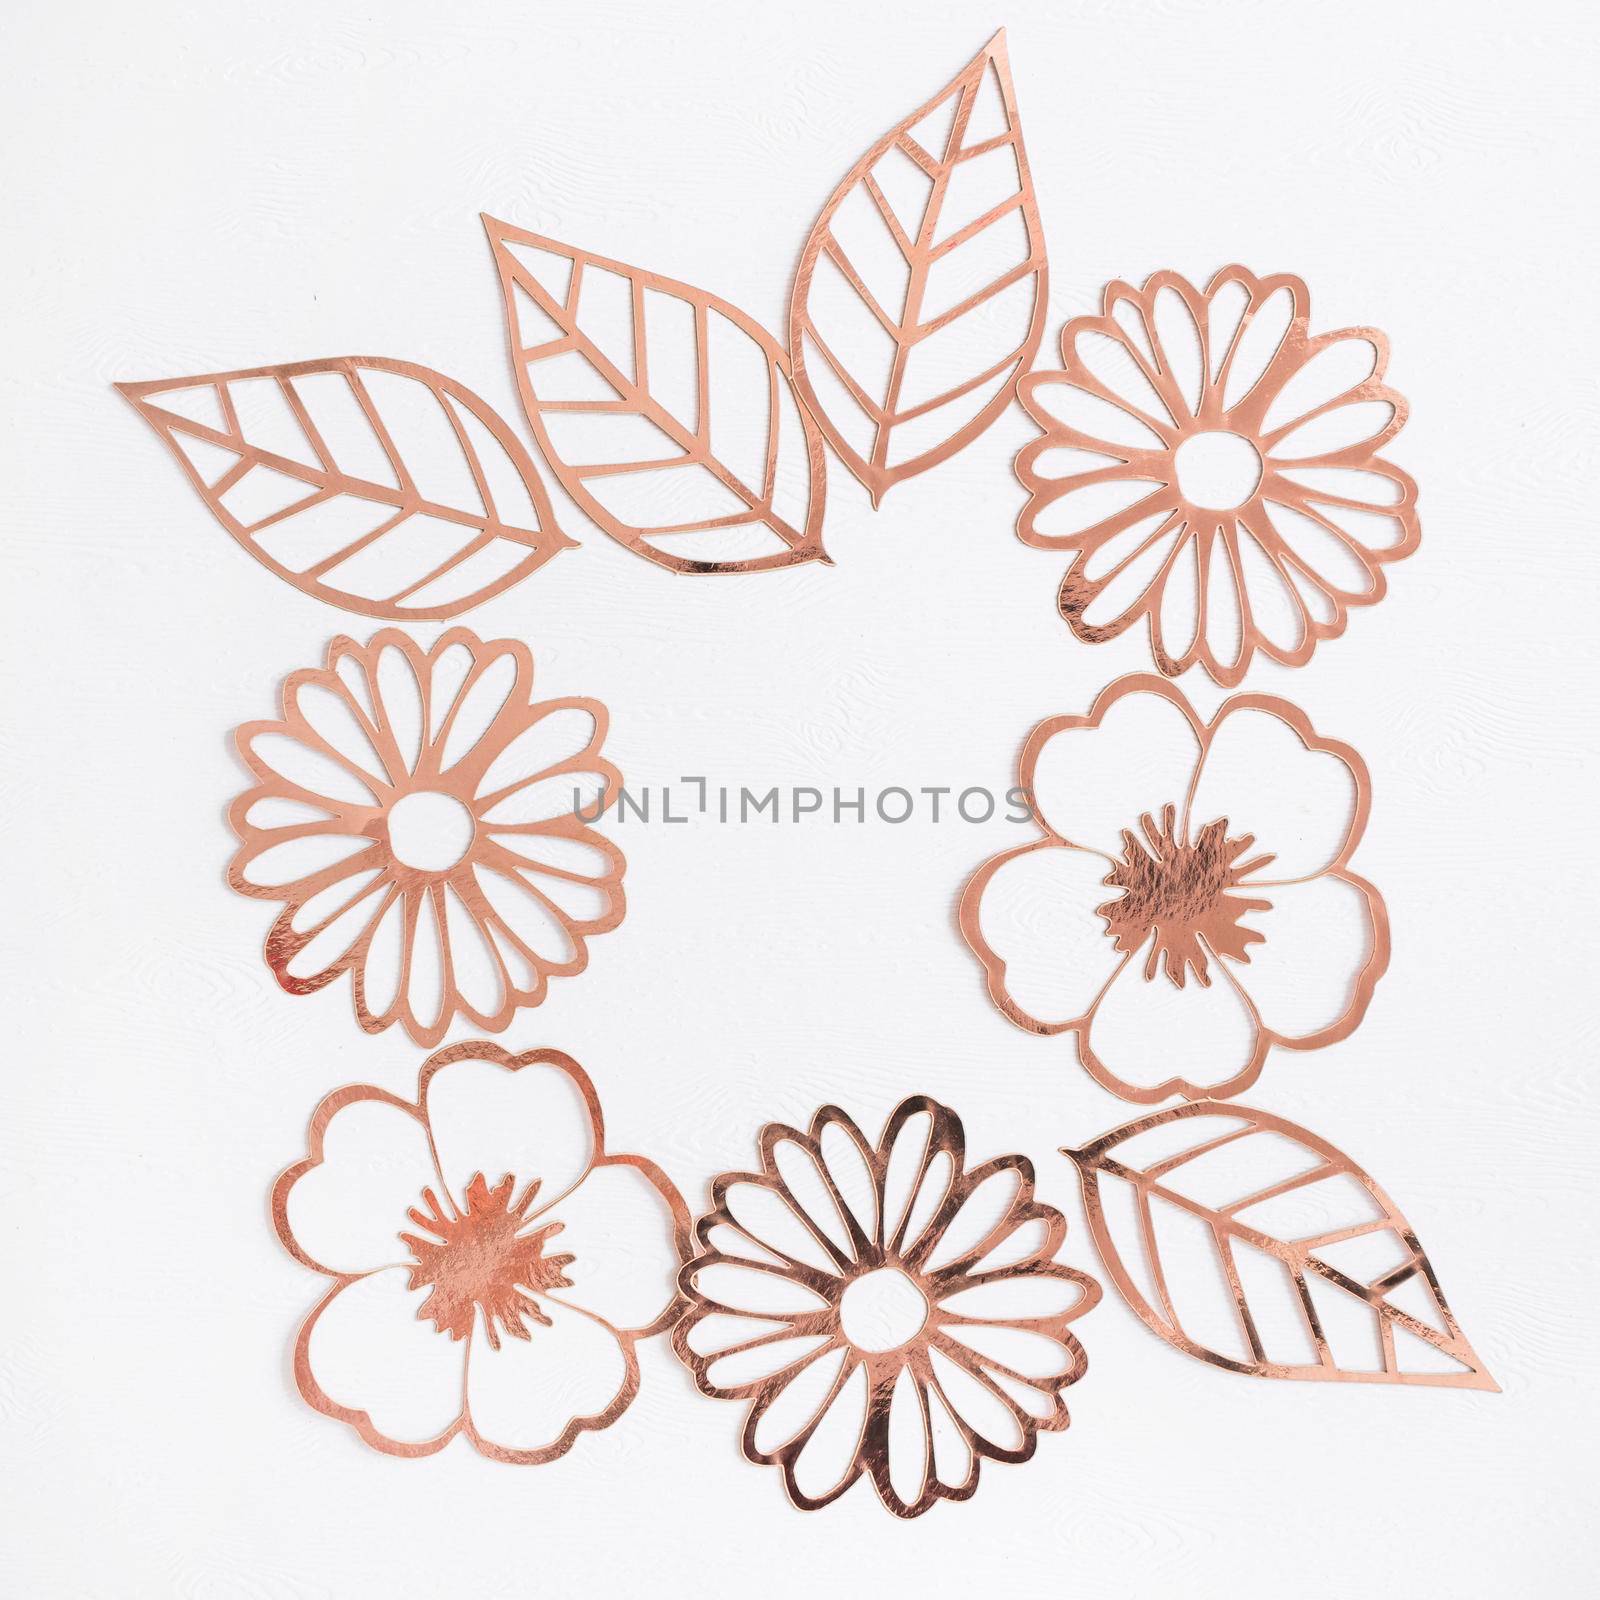 laser cutting flower leaves white background by Zahard